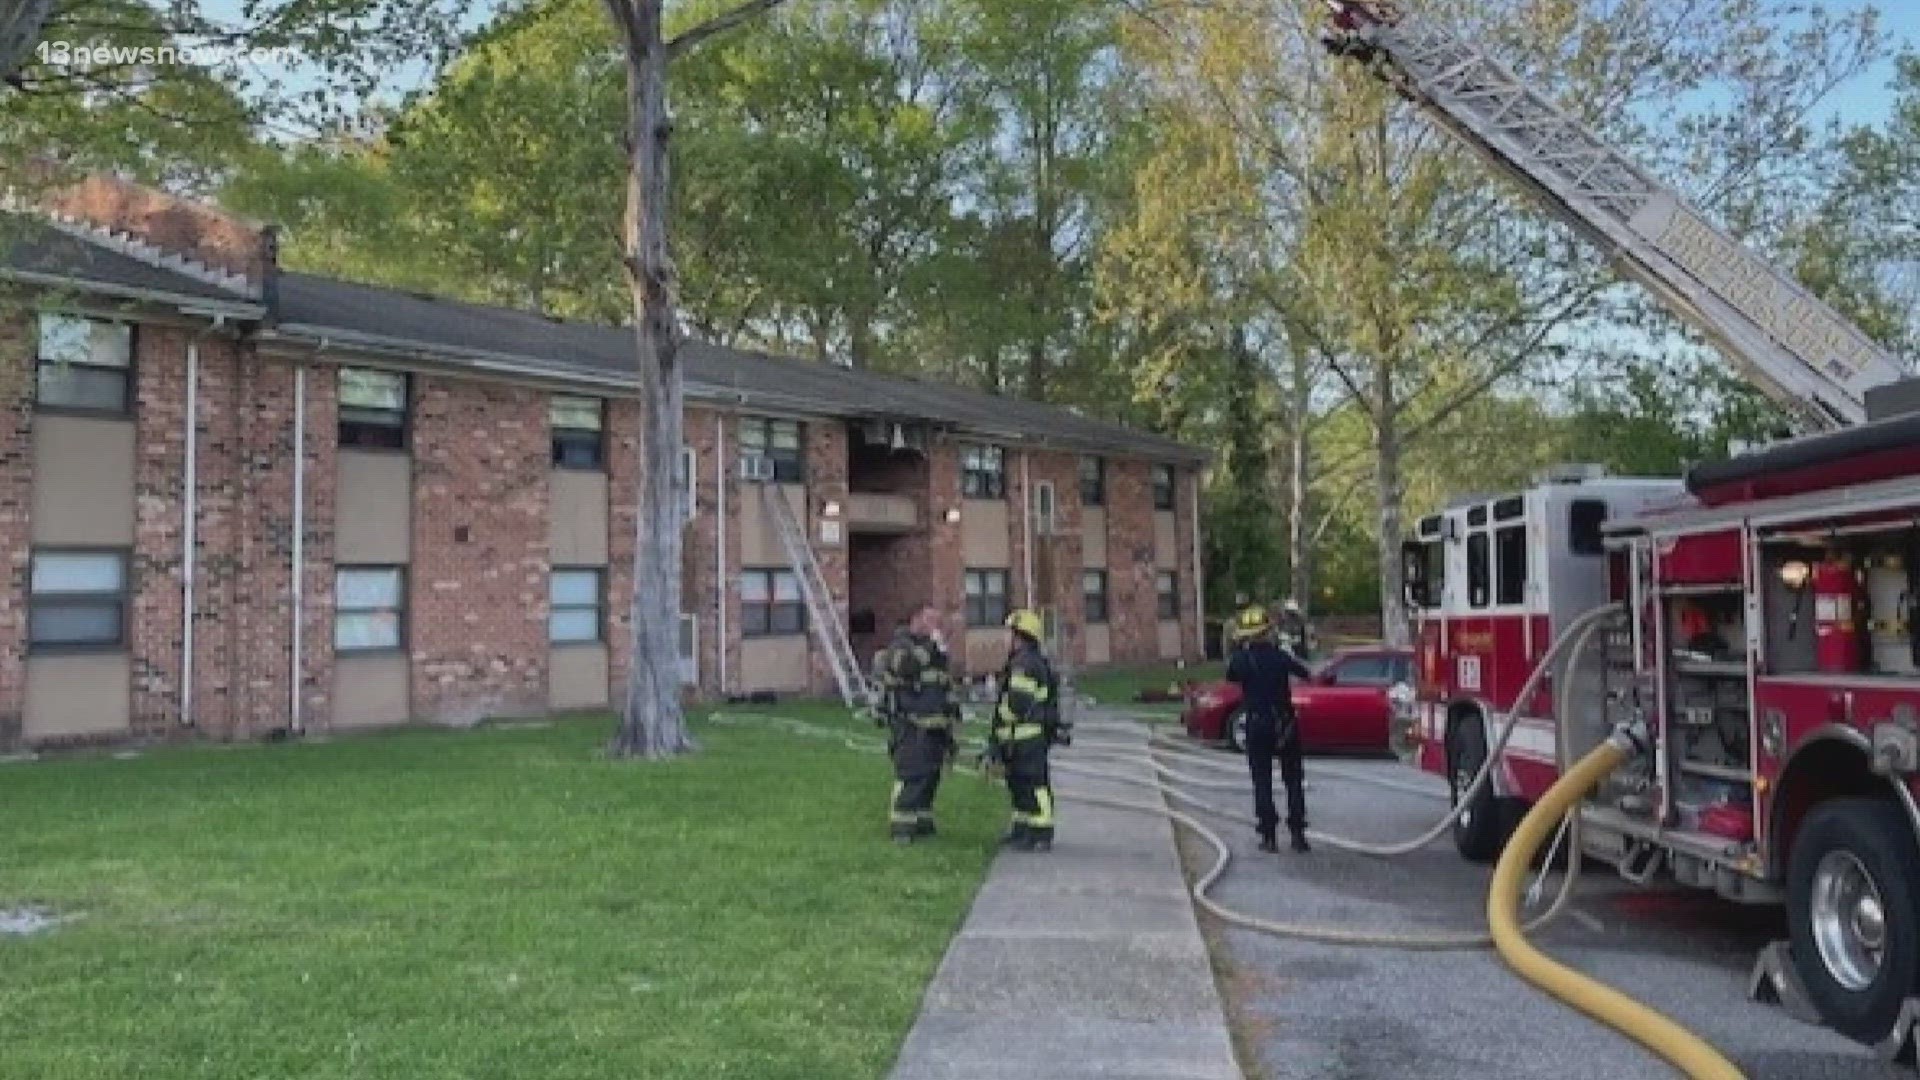 A total of 7 apartments were damaged in the MacDonald Manor Apartments in Chesapeake.